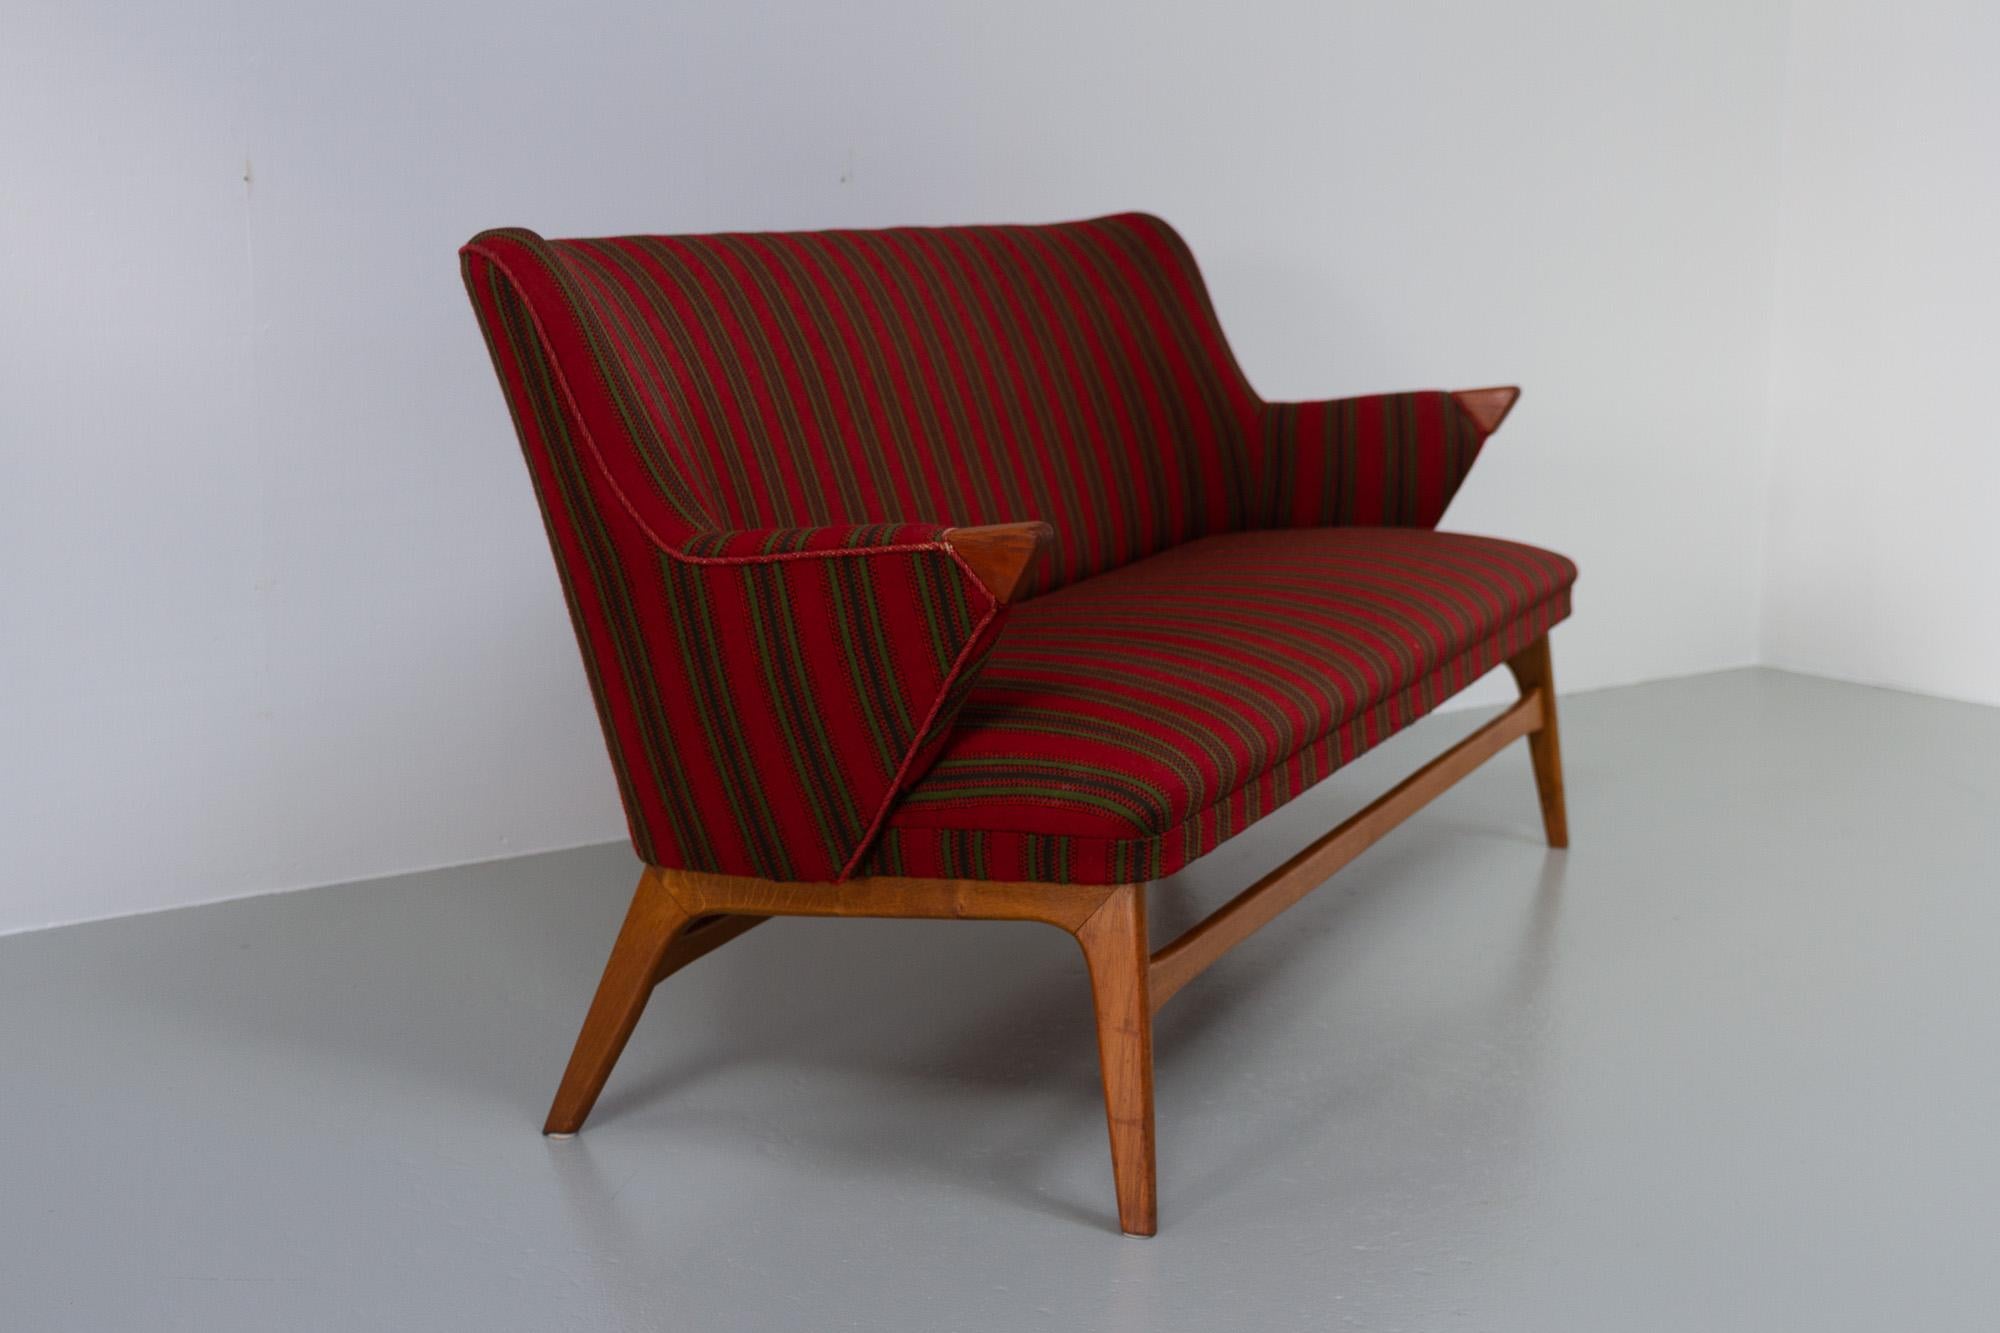 Vintage Danish Sofa, 1950s.
Organically shaped Mid-Century Modern sofa made by Danish master carpenter in Denmark in the 1940s or 1950s. Striped wool upholstery with teak details on armrests. Frame and legs in solid oak.

A light and elegant